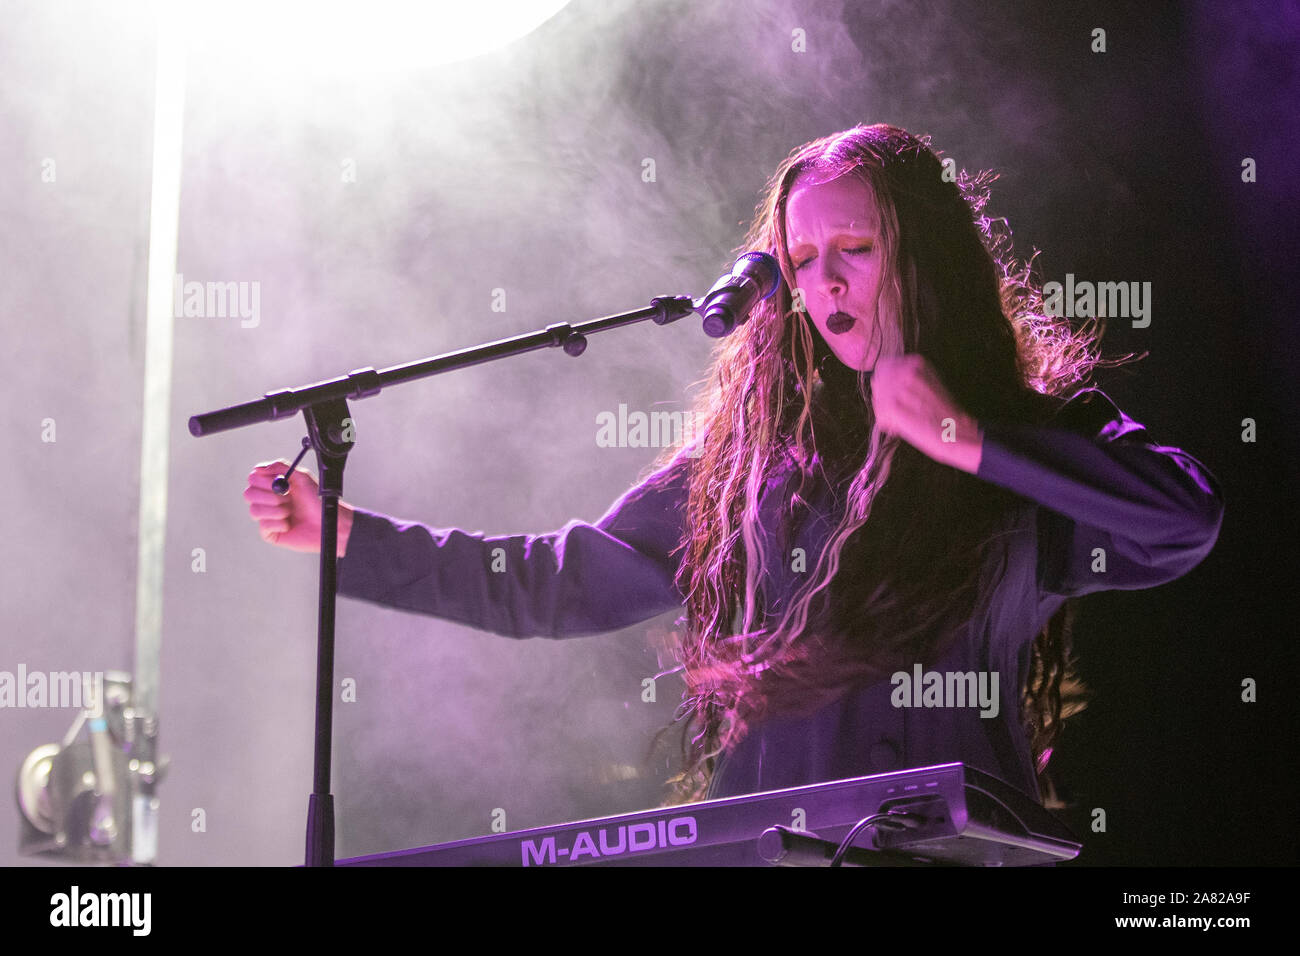 Brighton, UK. 5 Nov 2019, Alexandra Ashley Hughes, known by her stage name Allie X supporting Marina  on stage at the Brighton Centre   Credit: Jason Richardson/Alamy Live News Stock Photo